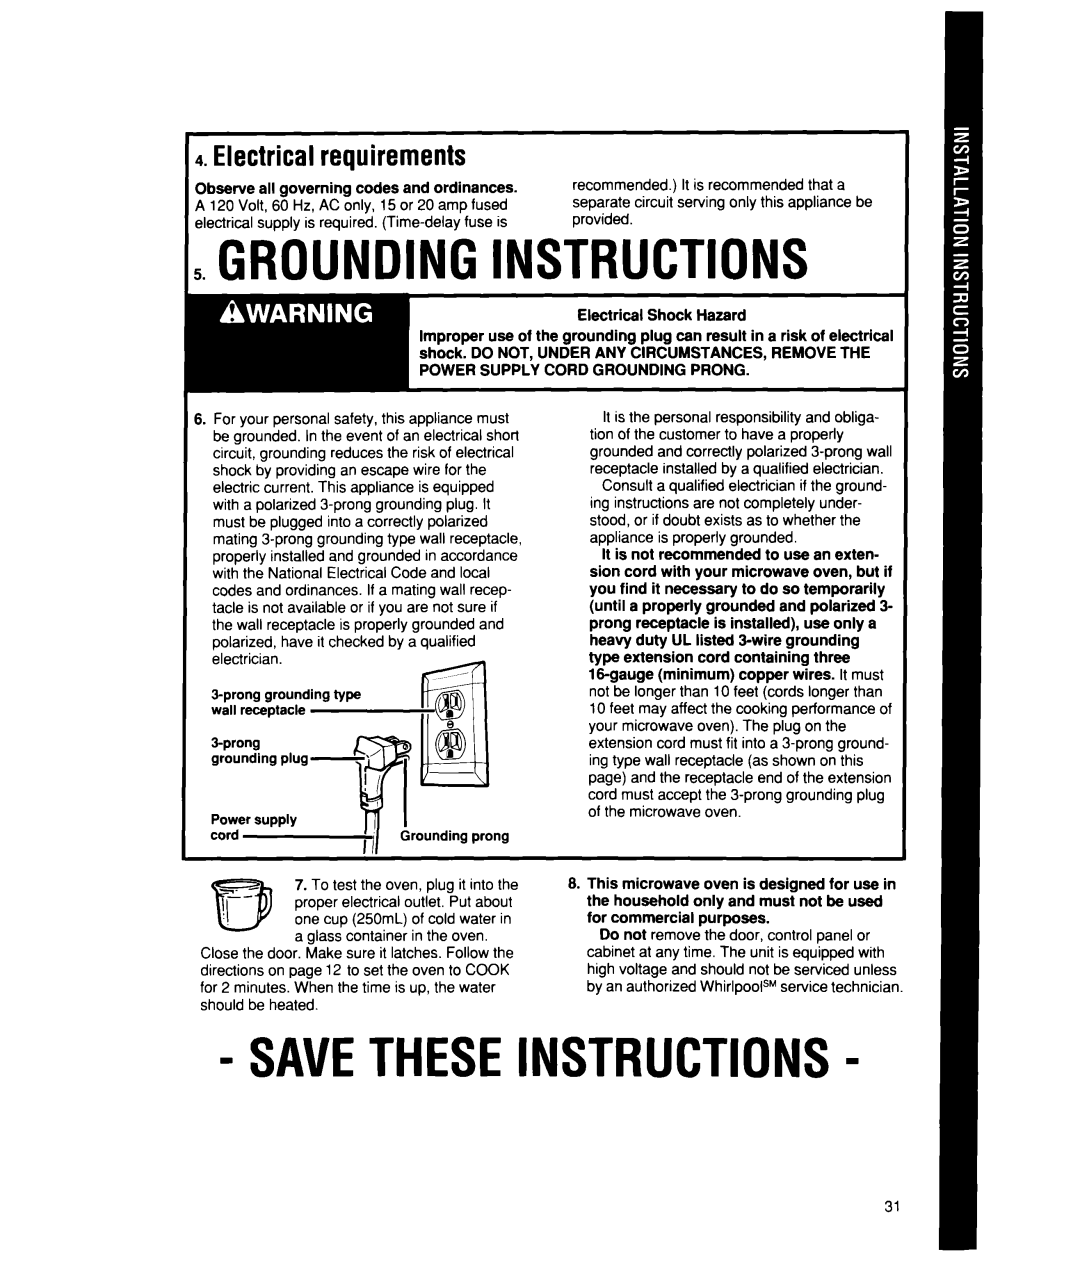 Whirlpool MT2150XW manual Groundinginstructions, Savetheseinstructions, Electrical requirements 